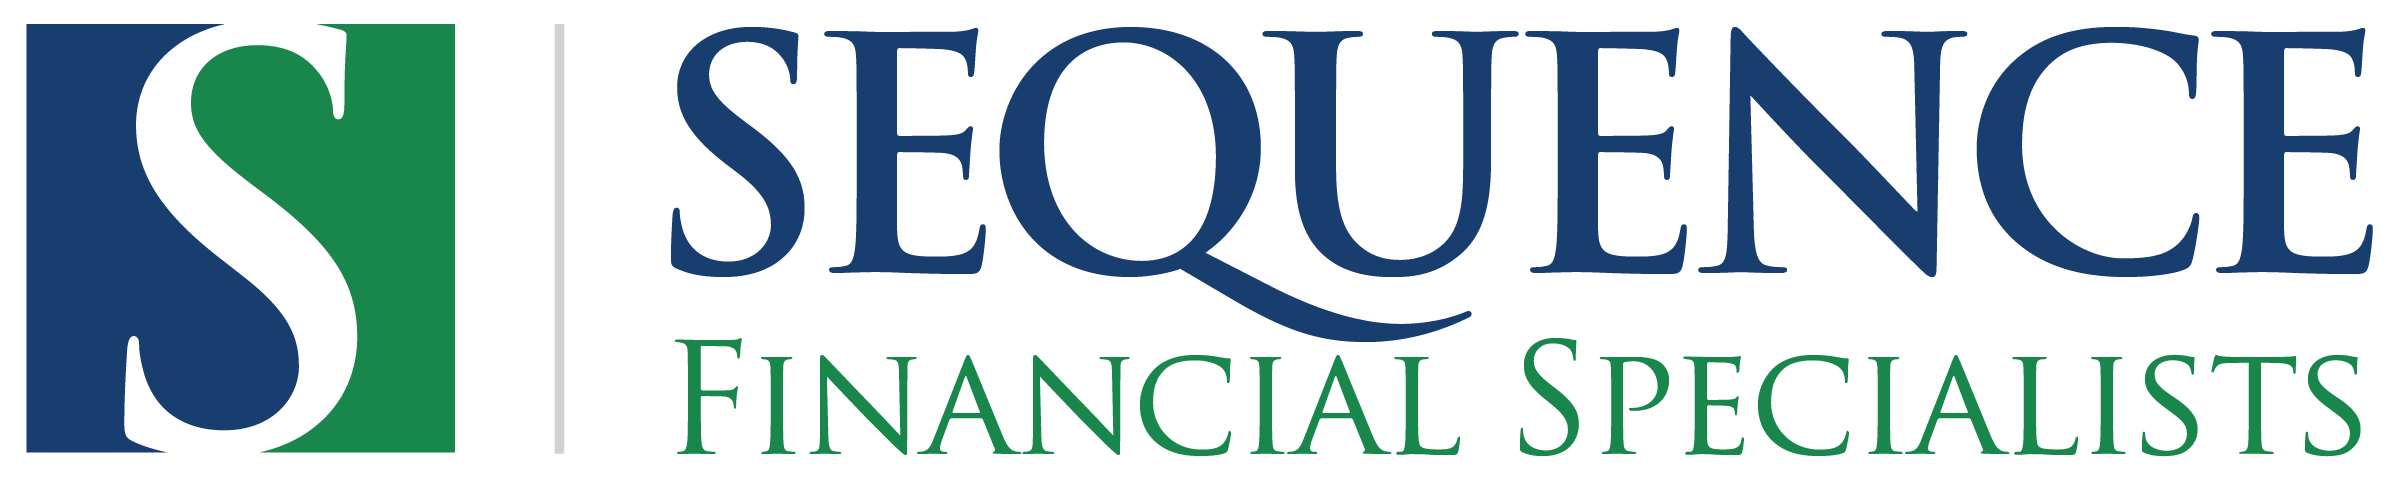 Sequence Financial Specialists logo